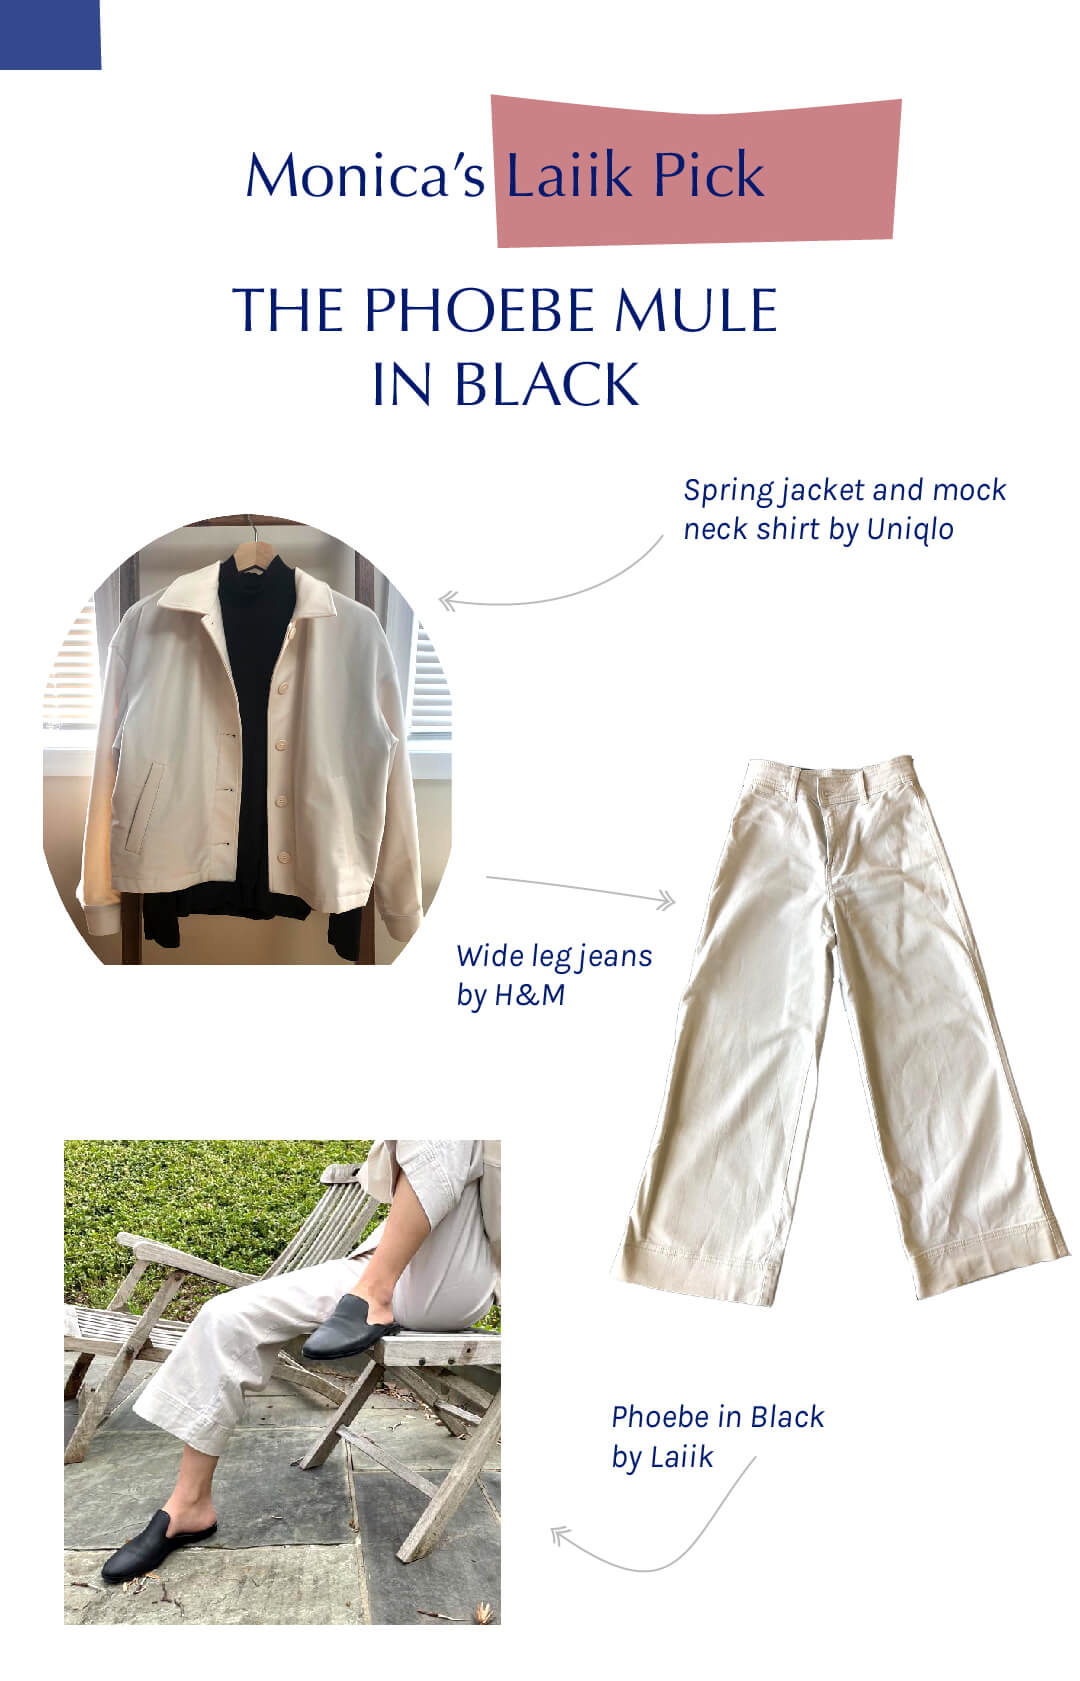 She styles the all natural, Phoebe mule in black Italian leather. Pairs it with wide-legged trousers and a spring jacket and mock neck shirt by Uniqlo.